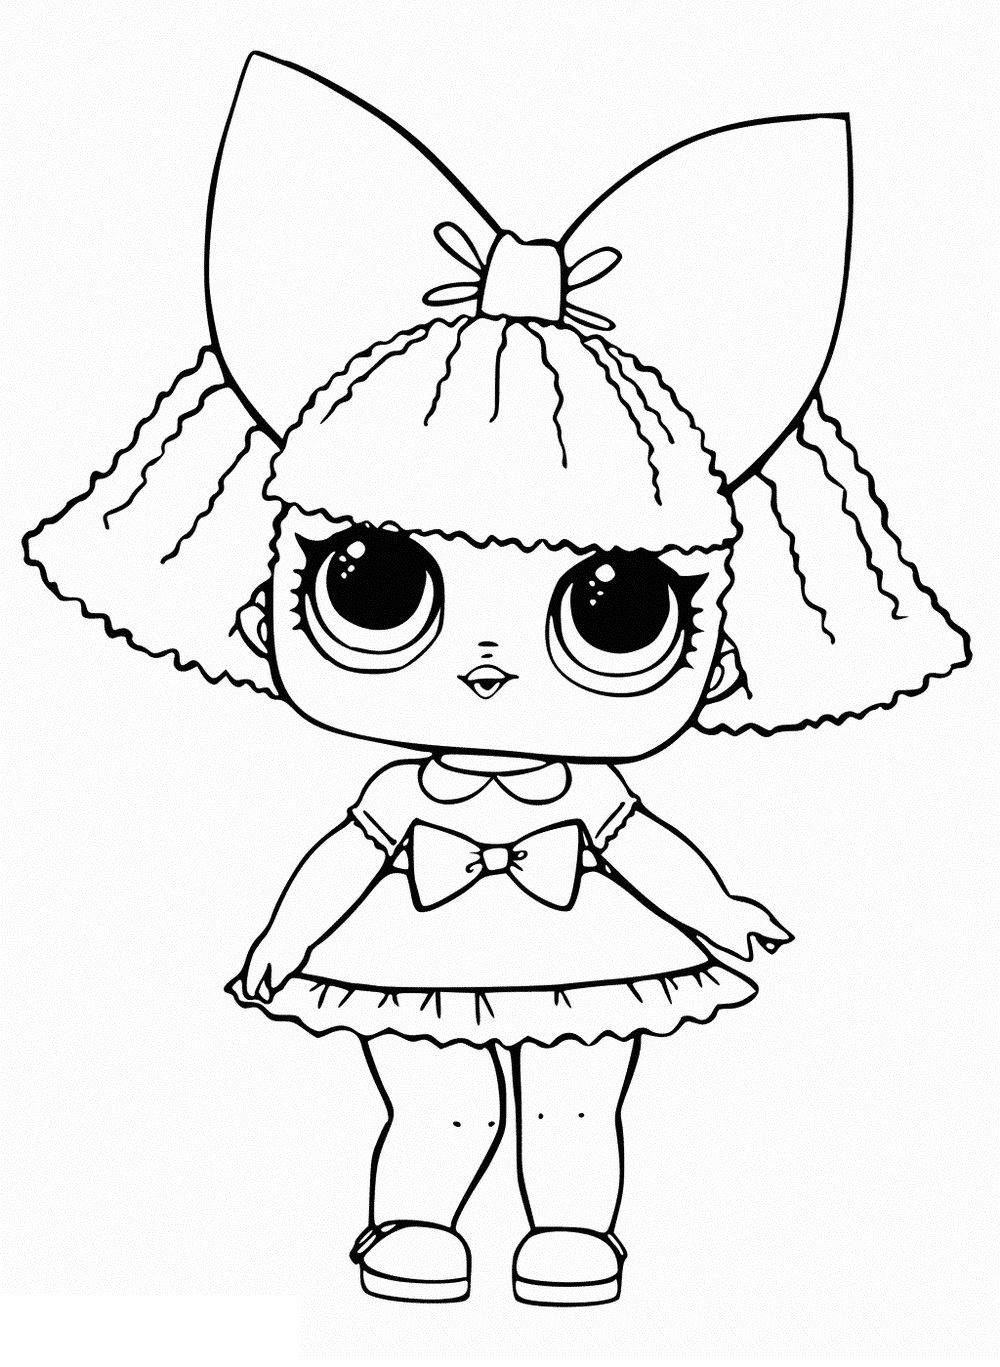 Coloring Pages of LOL Surprise Dolls. 20 Pieces of Black and White ...